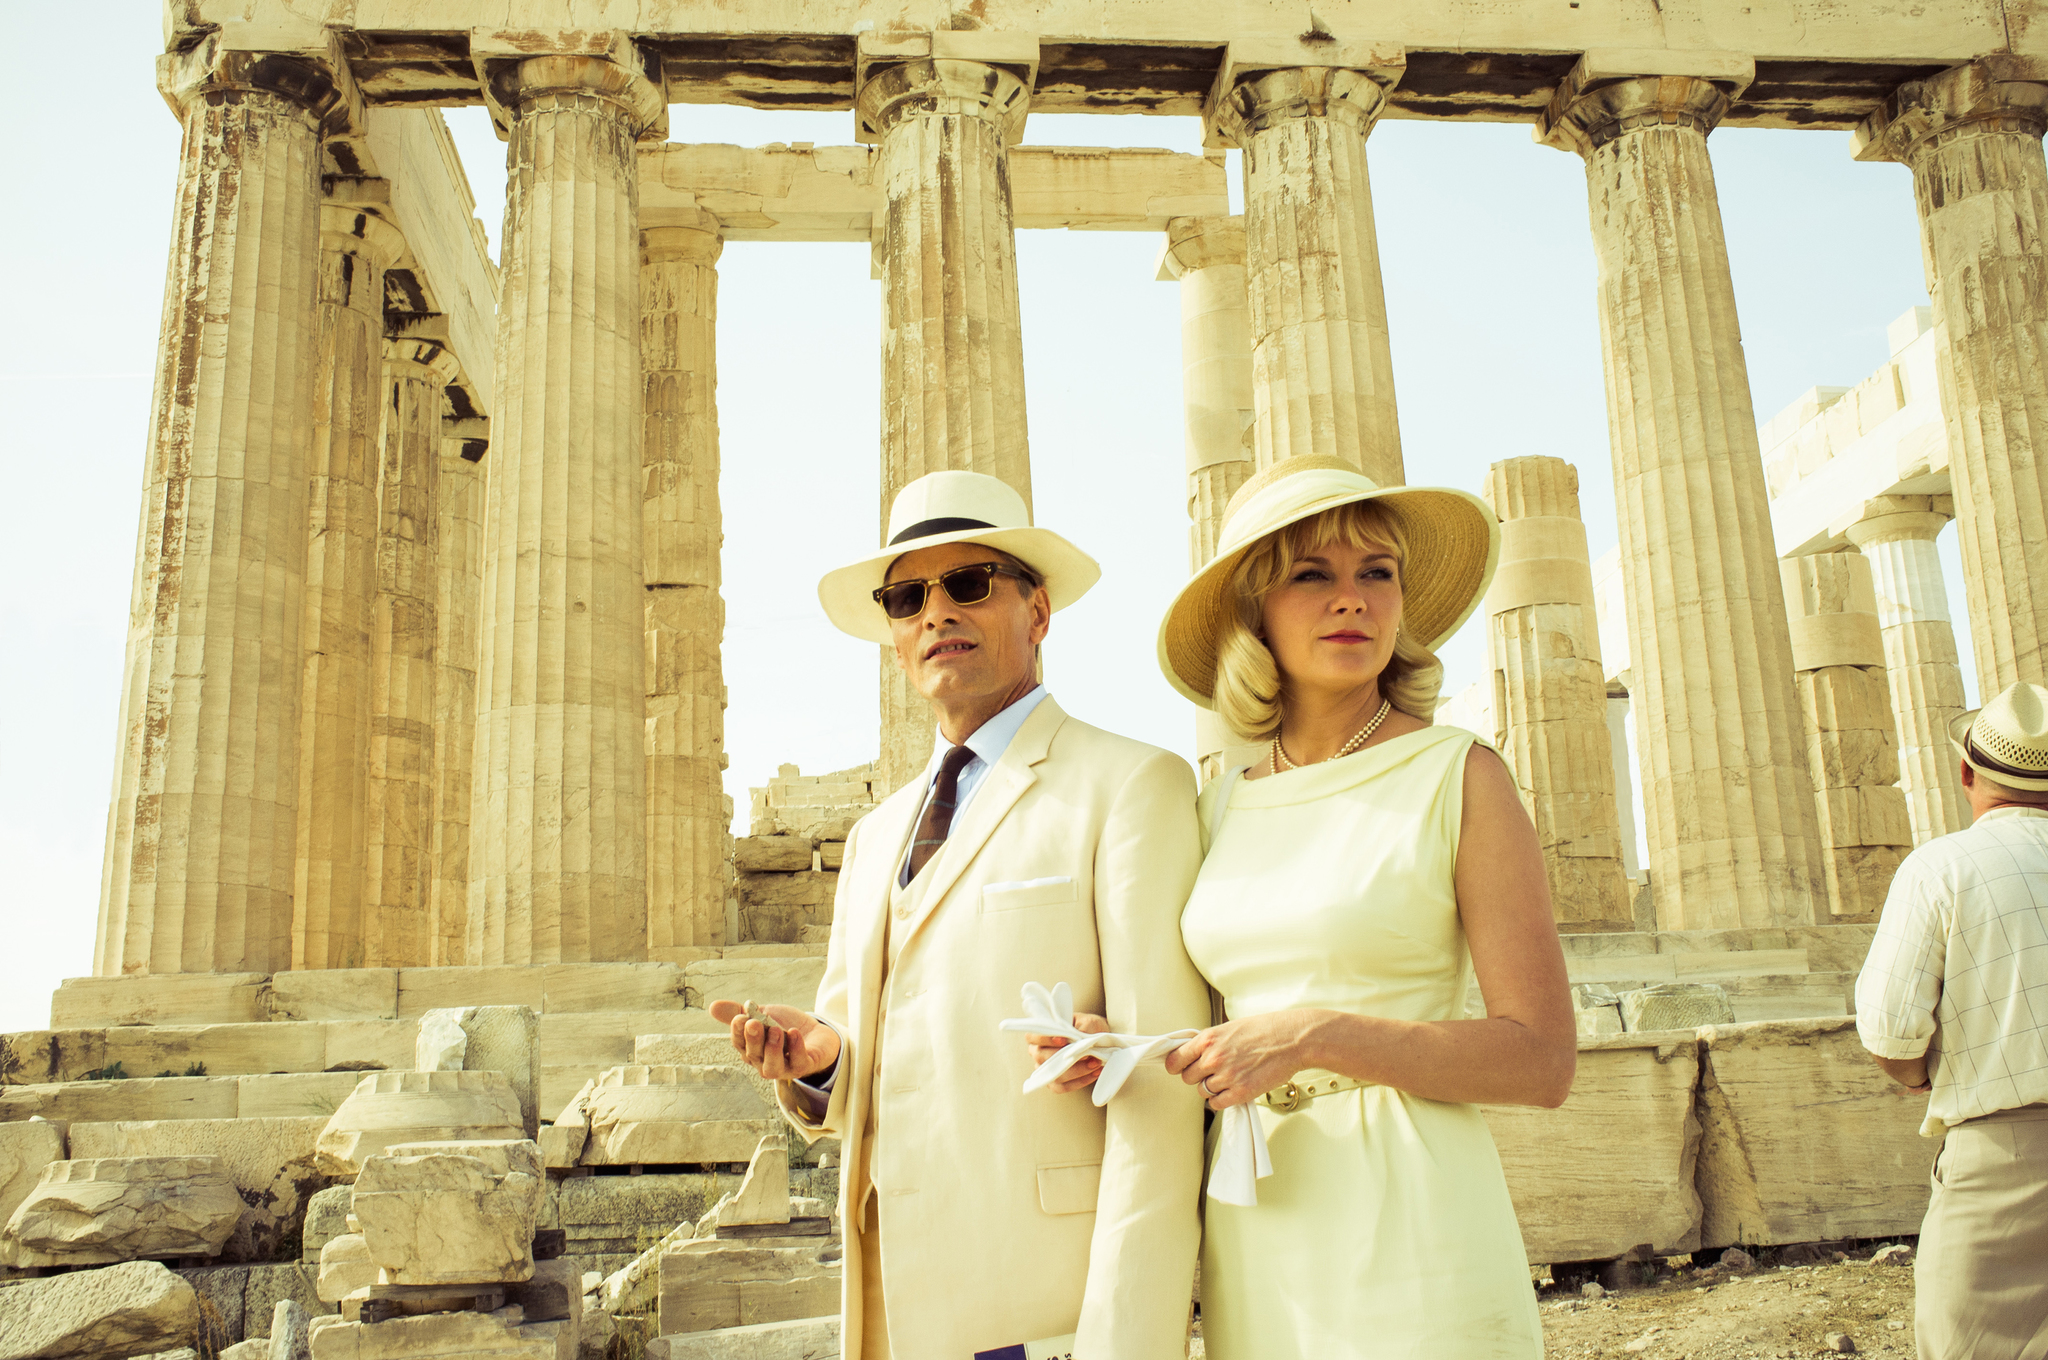 Still of Kirsten Dunst and Viggo Mortensen in The Two Faces of January (2014)